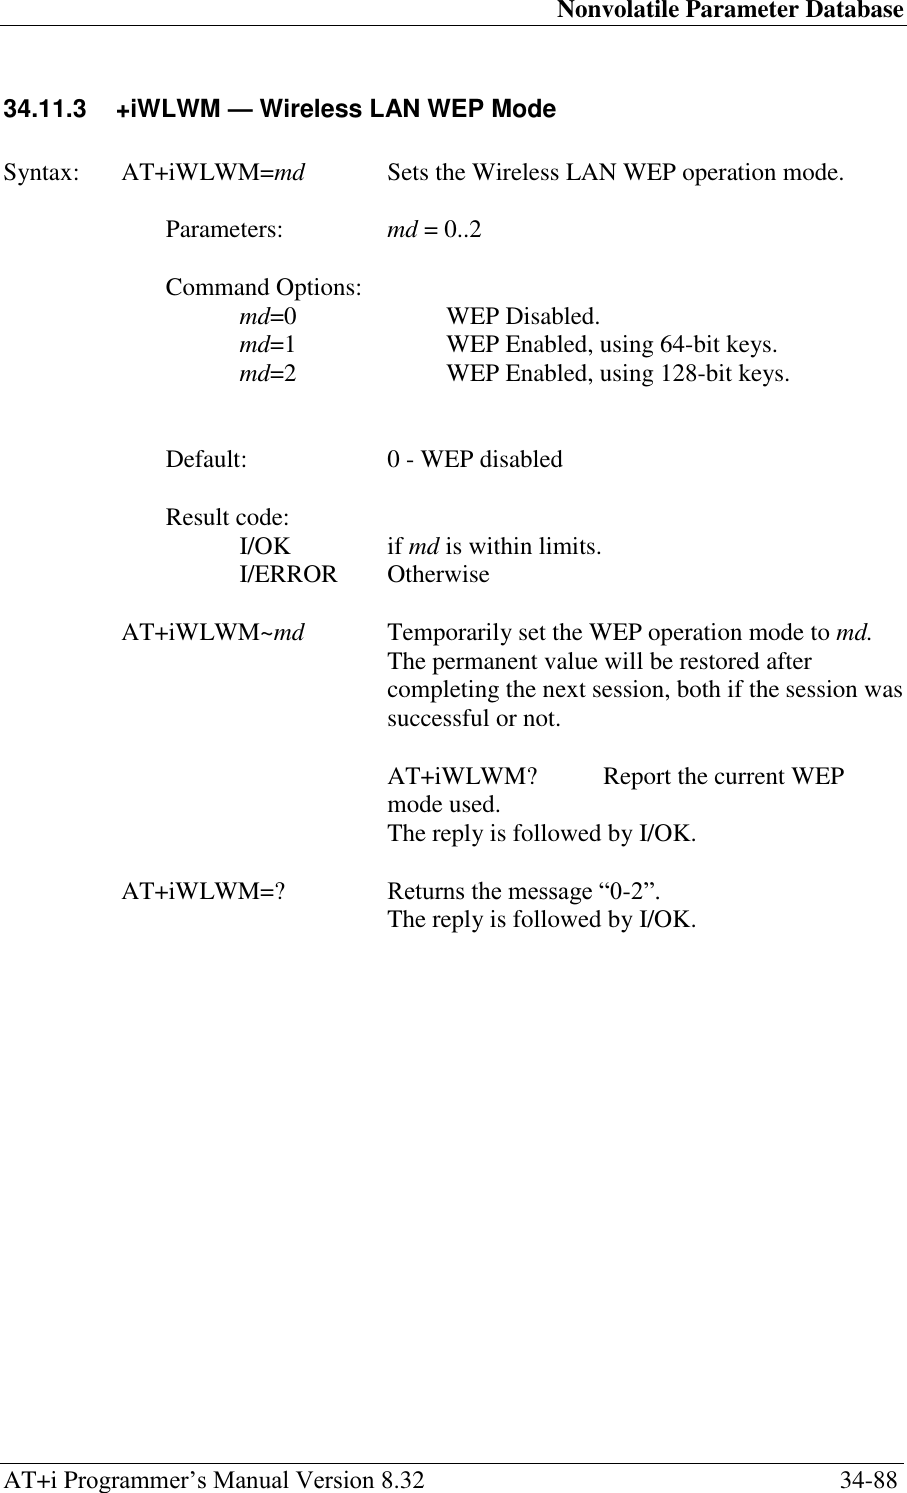 Nonvolatile Parameter Database AT+i Programmer‘s Manual Version 8.32  34-88 34.11.3  +iWLWM — Wireless LAN WEP Mode   Syntax:  AT+iWLWM=md  Sets the Wireless LAN WEP operation mode.  Parameters:  md = 0..2  Command Options: md=0  WEP Disabled. md=1  WEP Enabled, using 64-bit keys. md=2  WEP Enabled, using 128-bit keys.   Default:  0 - WEP disabled  Result code: I/OK  if md is within limits. I/ERROR   Otherwise  AT+iWLWM~md  Temporarily set the WEP operation mode to md. The permanent value will be restored after completing the next session, both if the session was successful or not.    AT+iWLWM?  Report the current WEP mode used.   The reply is followed by I/OK.  AT+iWLWM=?  Returns the message ―0-2‖.   The reply is followed by I/OK. 